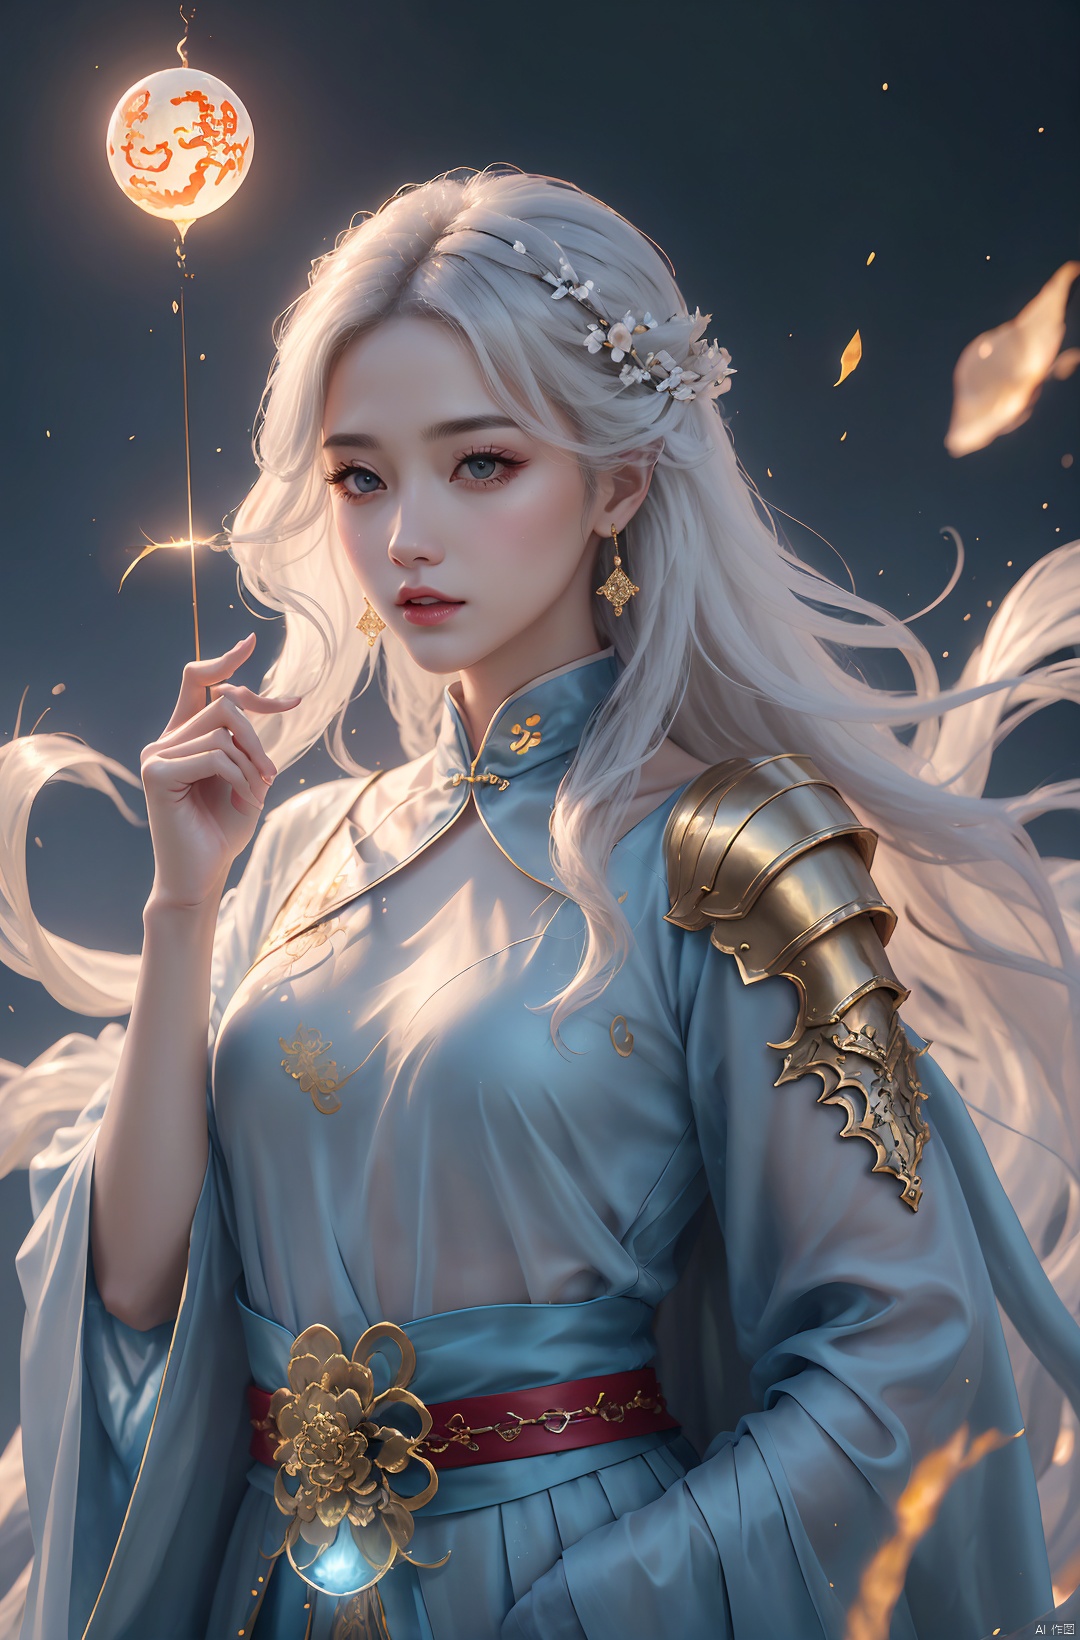  a woman with white hair holding a glowing ball in her hands, white haired deity, by Yang J, heise jinyao, inspired by Zhang Han, xianxia fantasy, flowing gold robes, inspired by Guan Daosheng, human and dragon fusion, cai xukun, inspired by Zhao Yuan, with long white hair, fantasy art style,,Ink scattering_Chinese style, smwuxia Chinese text blood weapon:sw, lotus leaf, (\shen ming shao nv\), gold armor, a boy_gmlwman, wunv, (/qingning/), (\MBTI\)